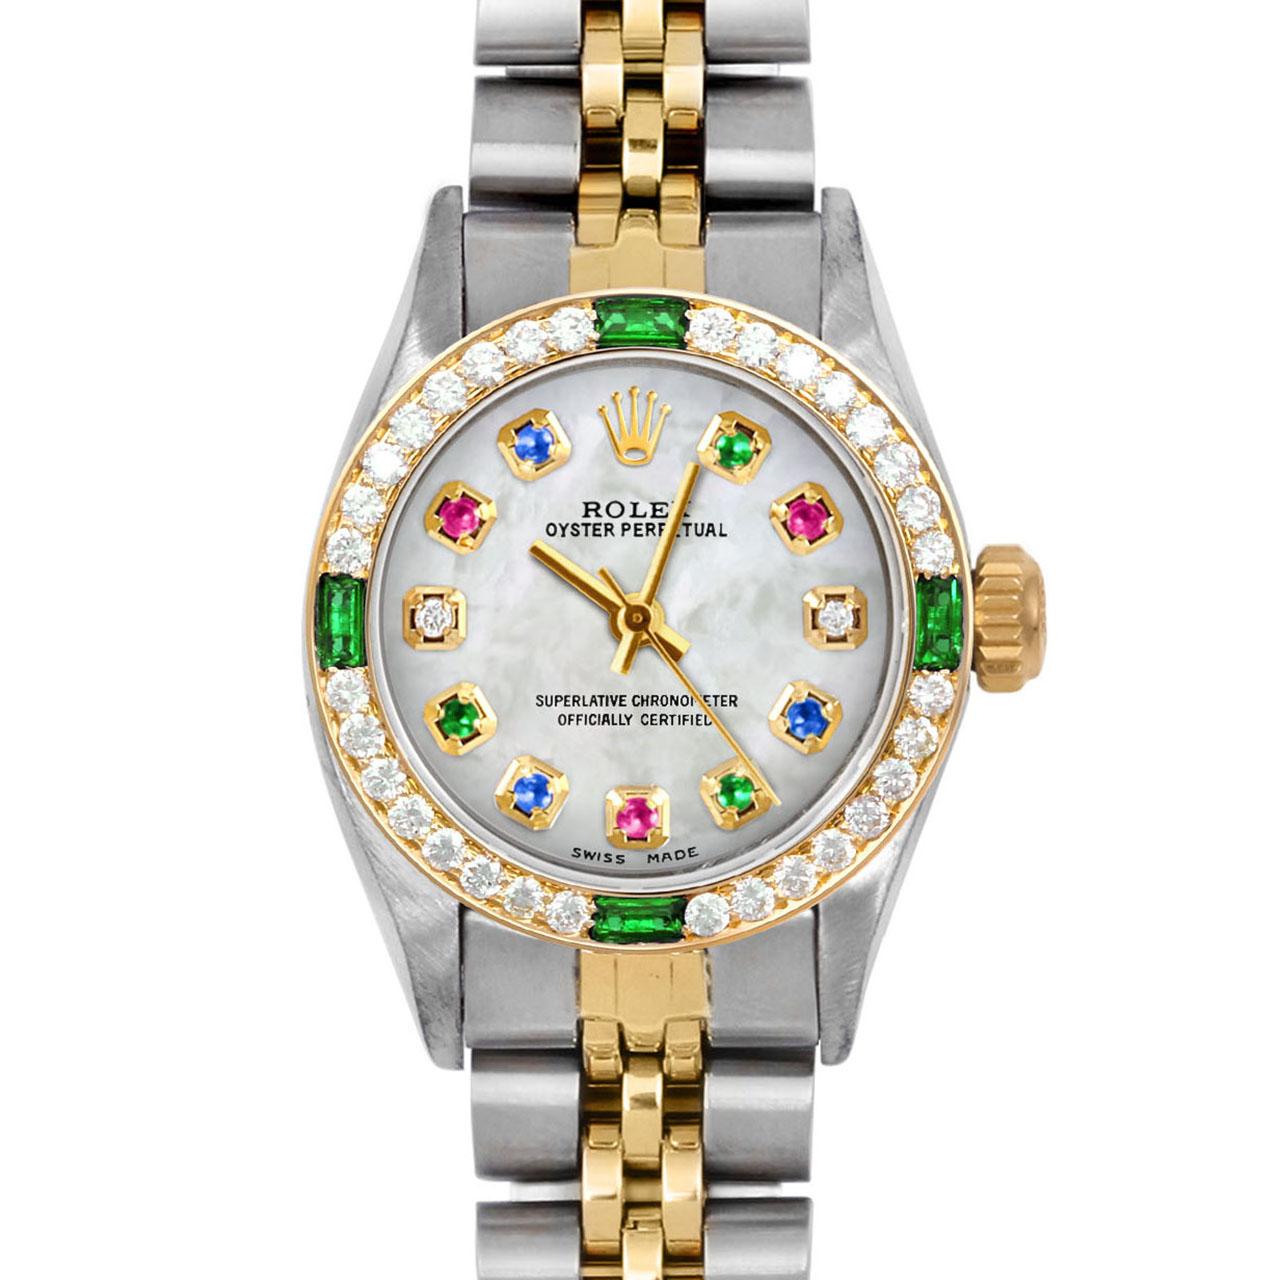 Brand : Rolex
Model : Oyster Perpetual 
Gender : Ladies
Metals : 14K Yellow Gold / Stainless Steel
Case Size : 24 mm

Dial : Custom Synthetic MOP Rainbow Emerald Ruby Sapphire Diamond Dial (This dial is not original Rolex And has been added